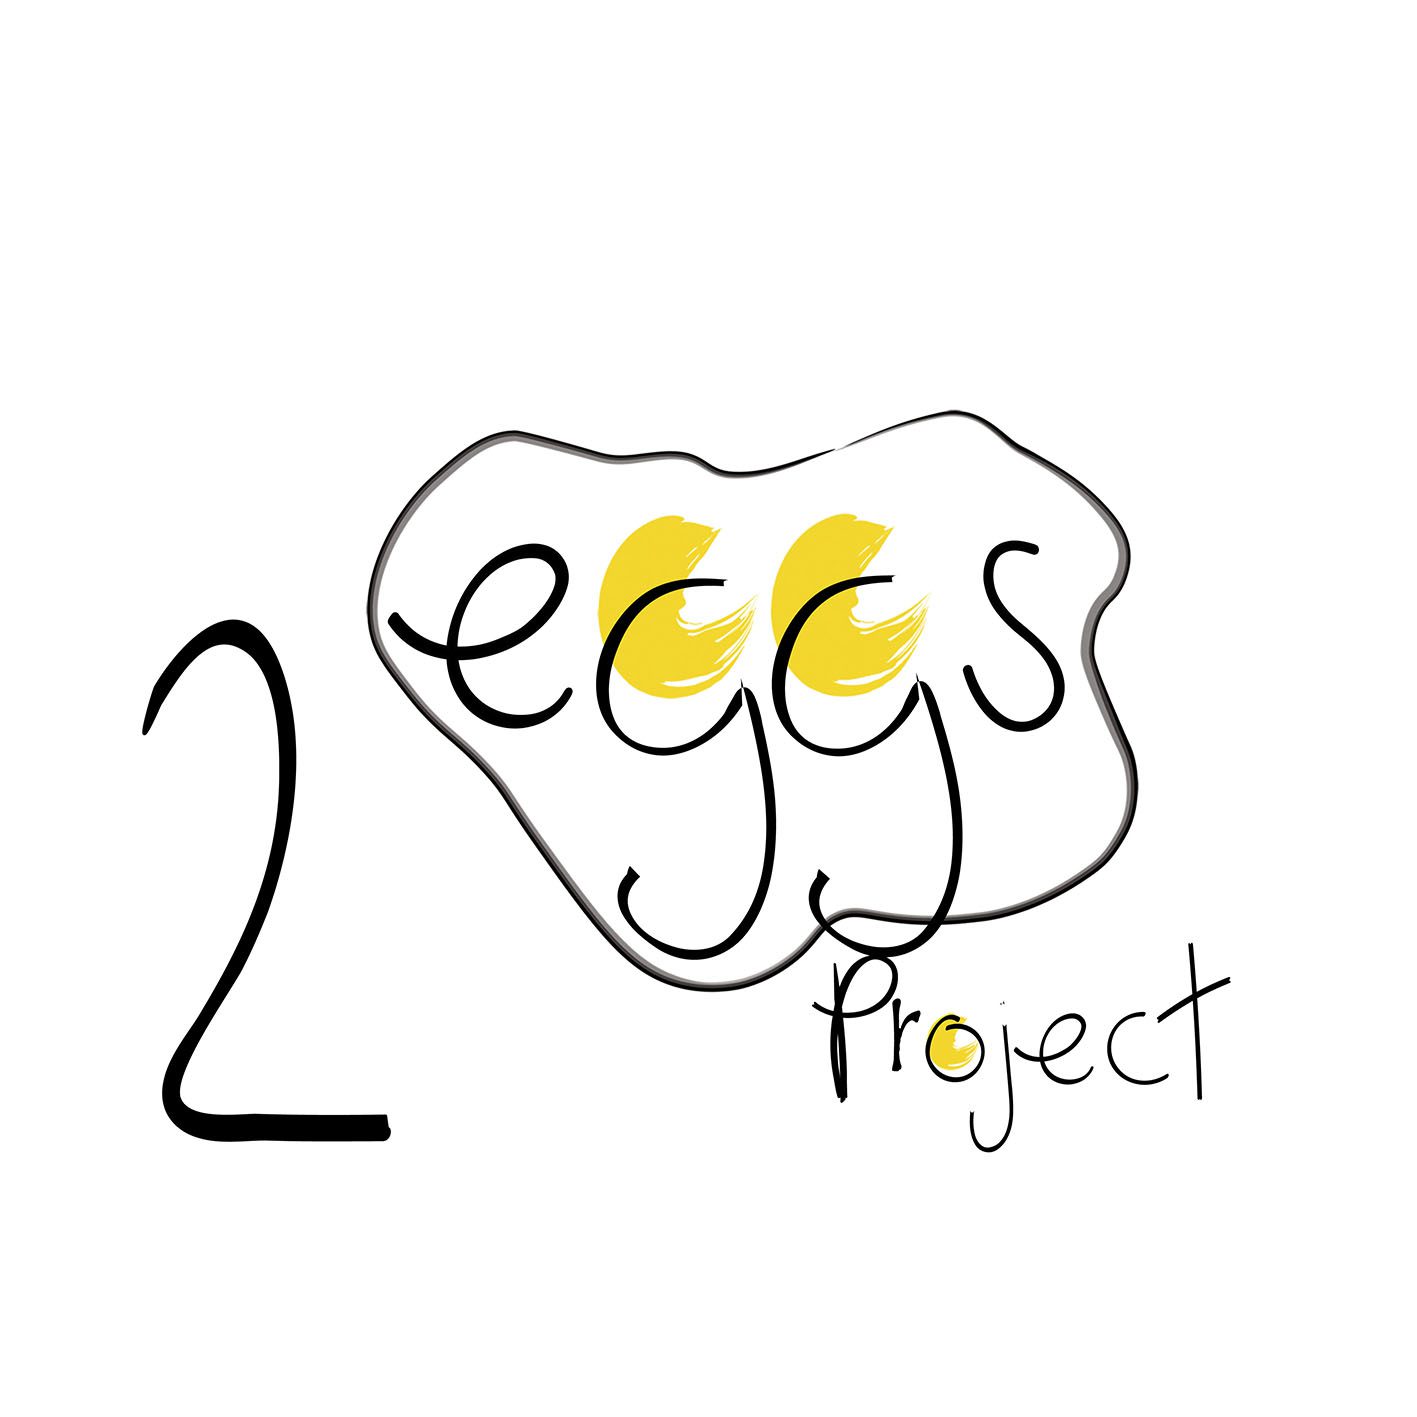 2eggsProject